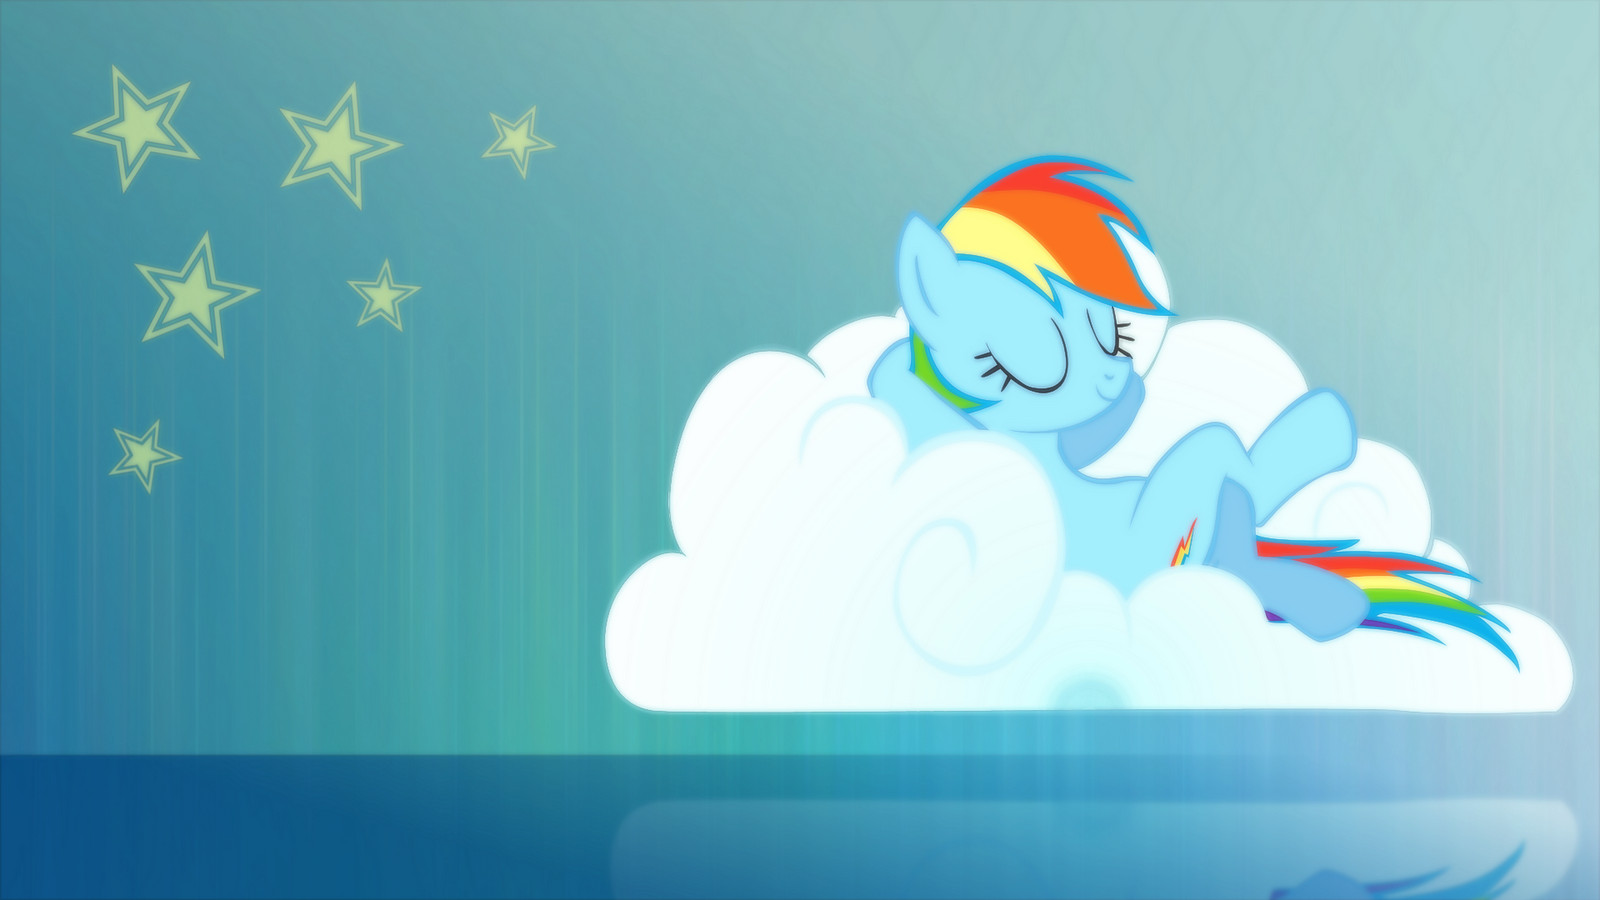 Awesome Rainbowdash by AbsentParachute